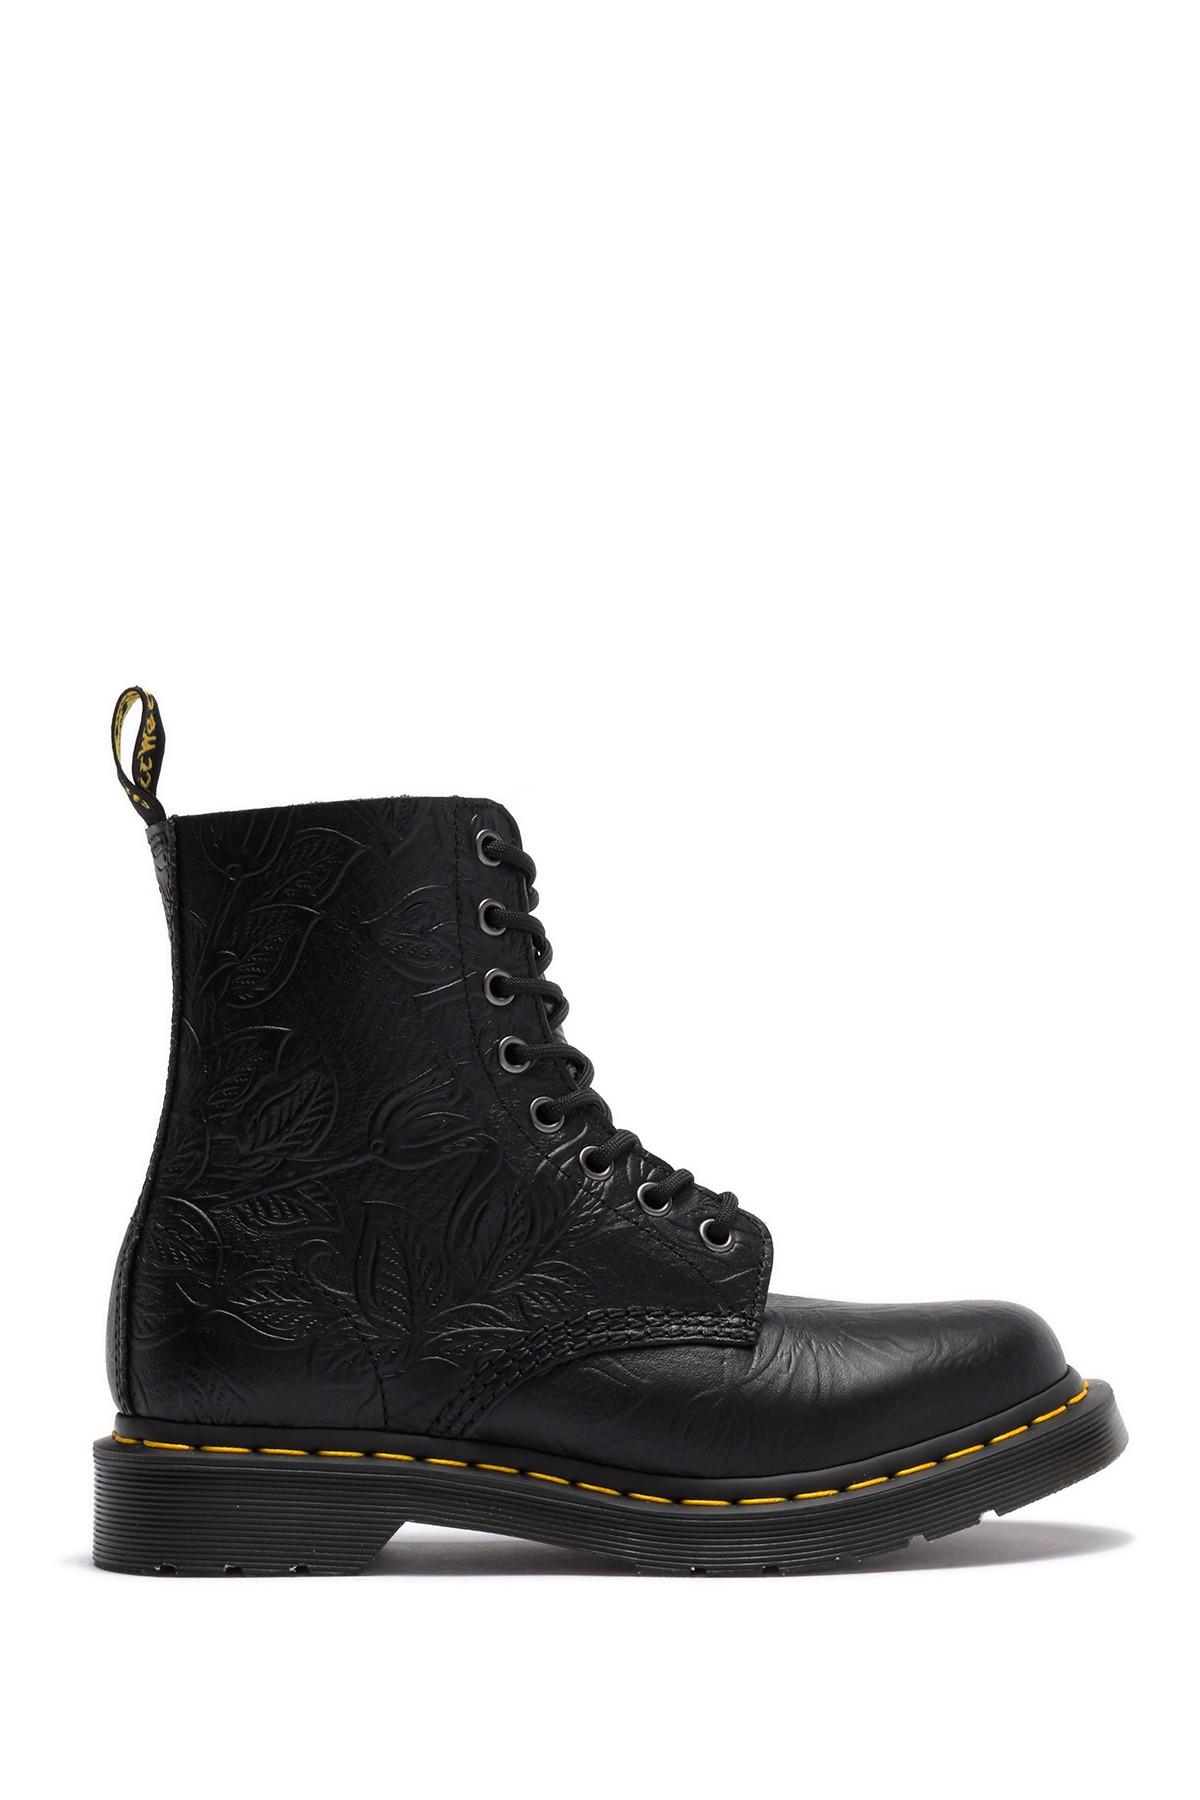 Dr. Martens 1460 Pascal Floral Emboss Mid Boots in Black | Lyst